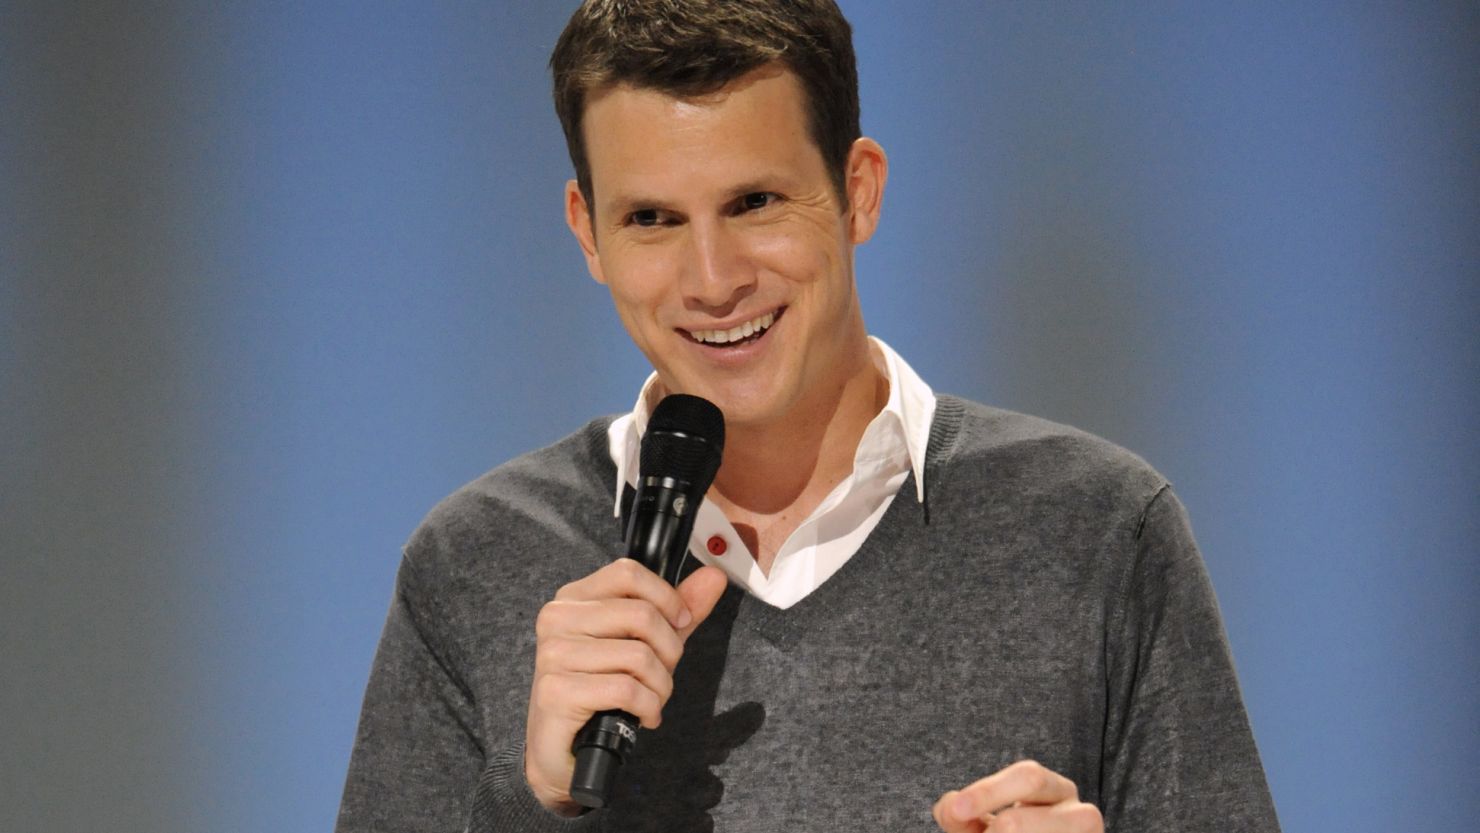 Gilbert Gottfried says if you don't think Daniel Tosh's jokes are funny, don't listen and don't go to his shows.